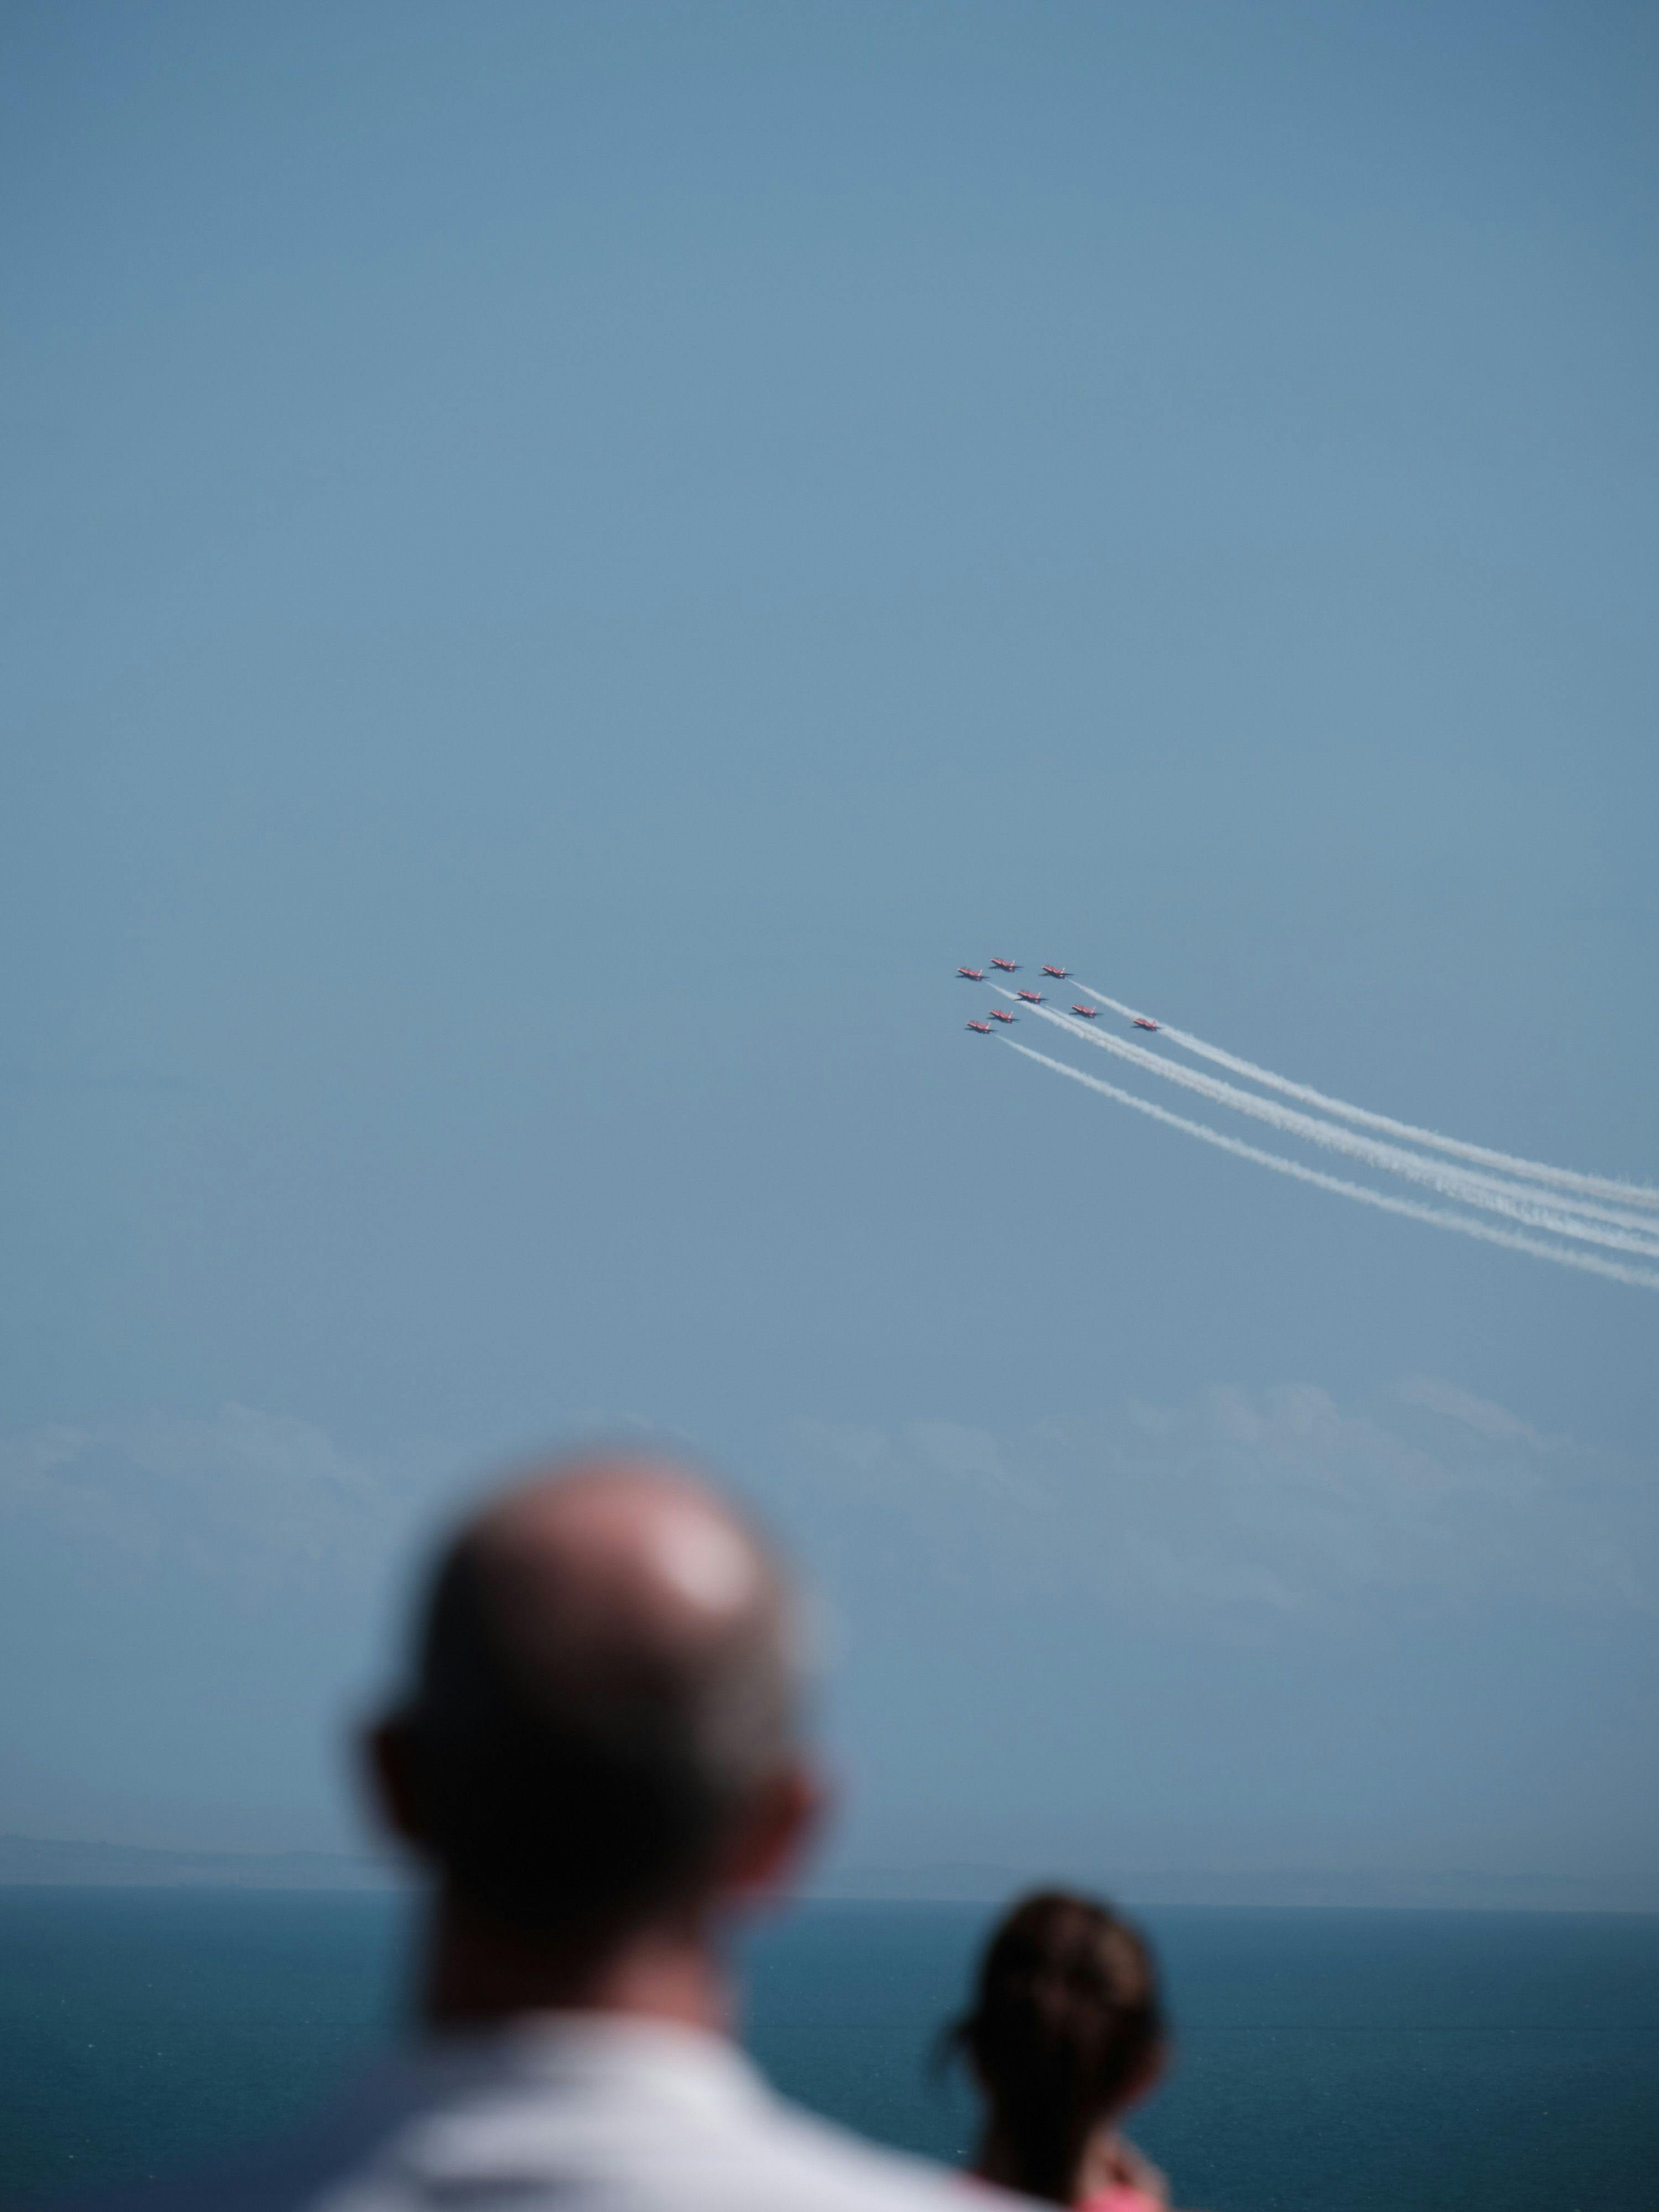 The Red Arrows fly across The Channel, people look on out of focus